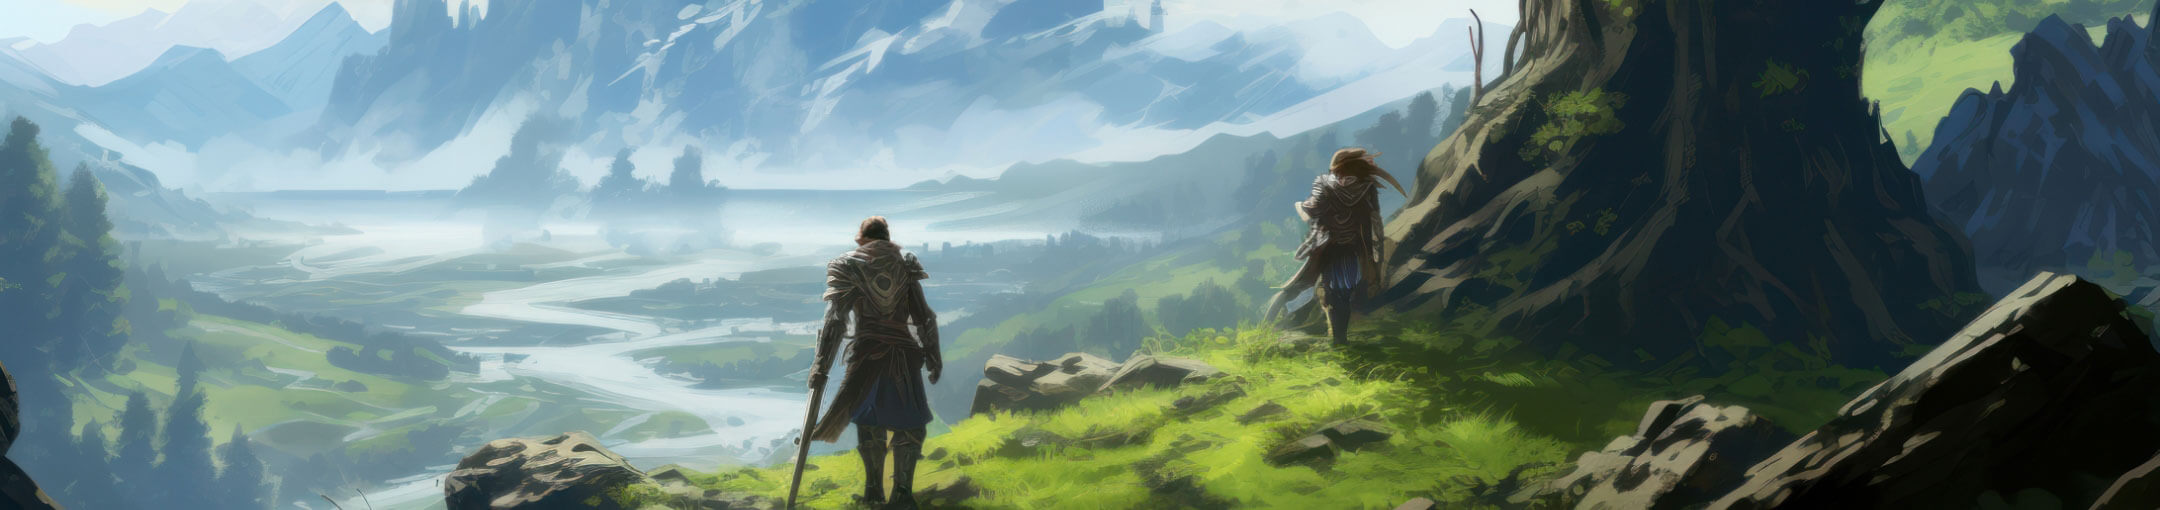 Illustration of two heroes standing at the top of a hill overlooking a valley.